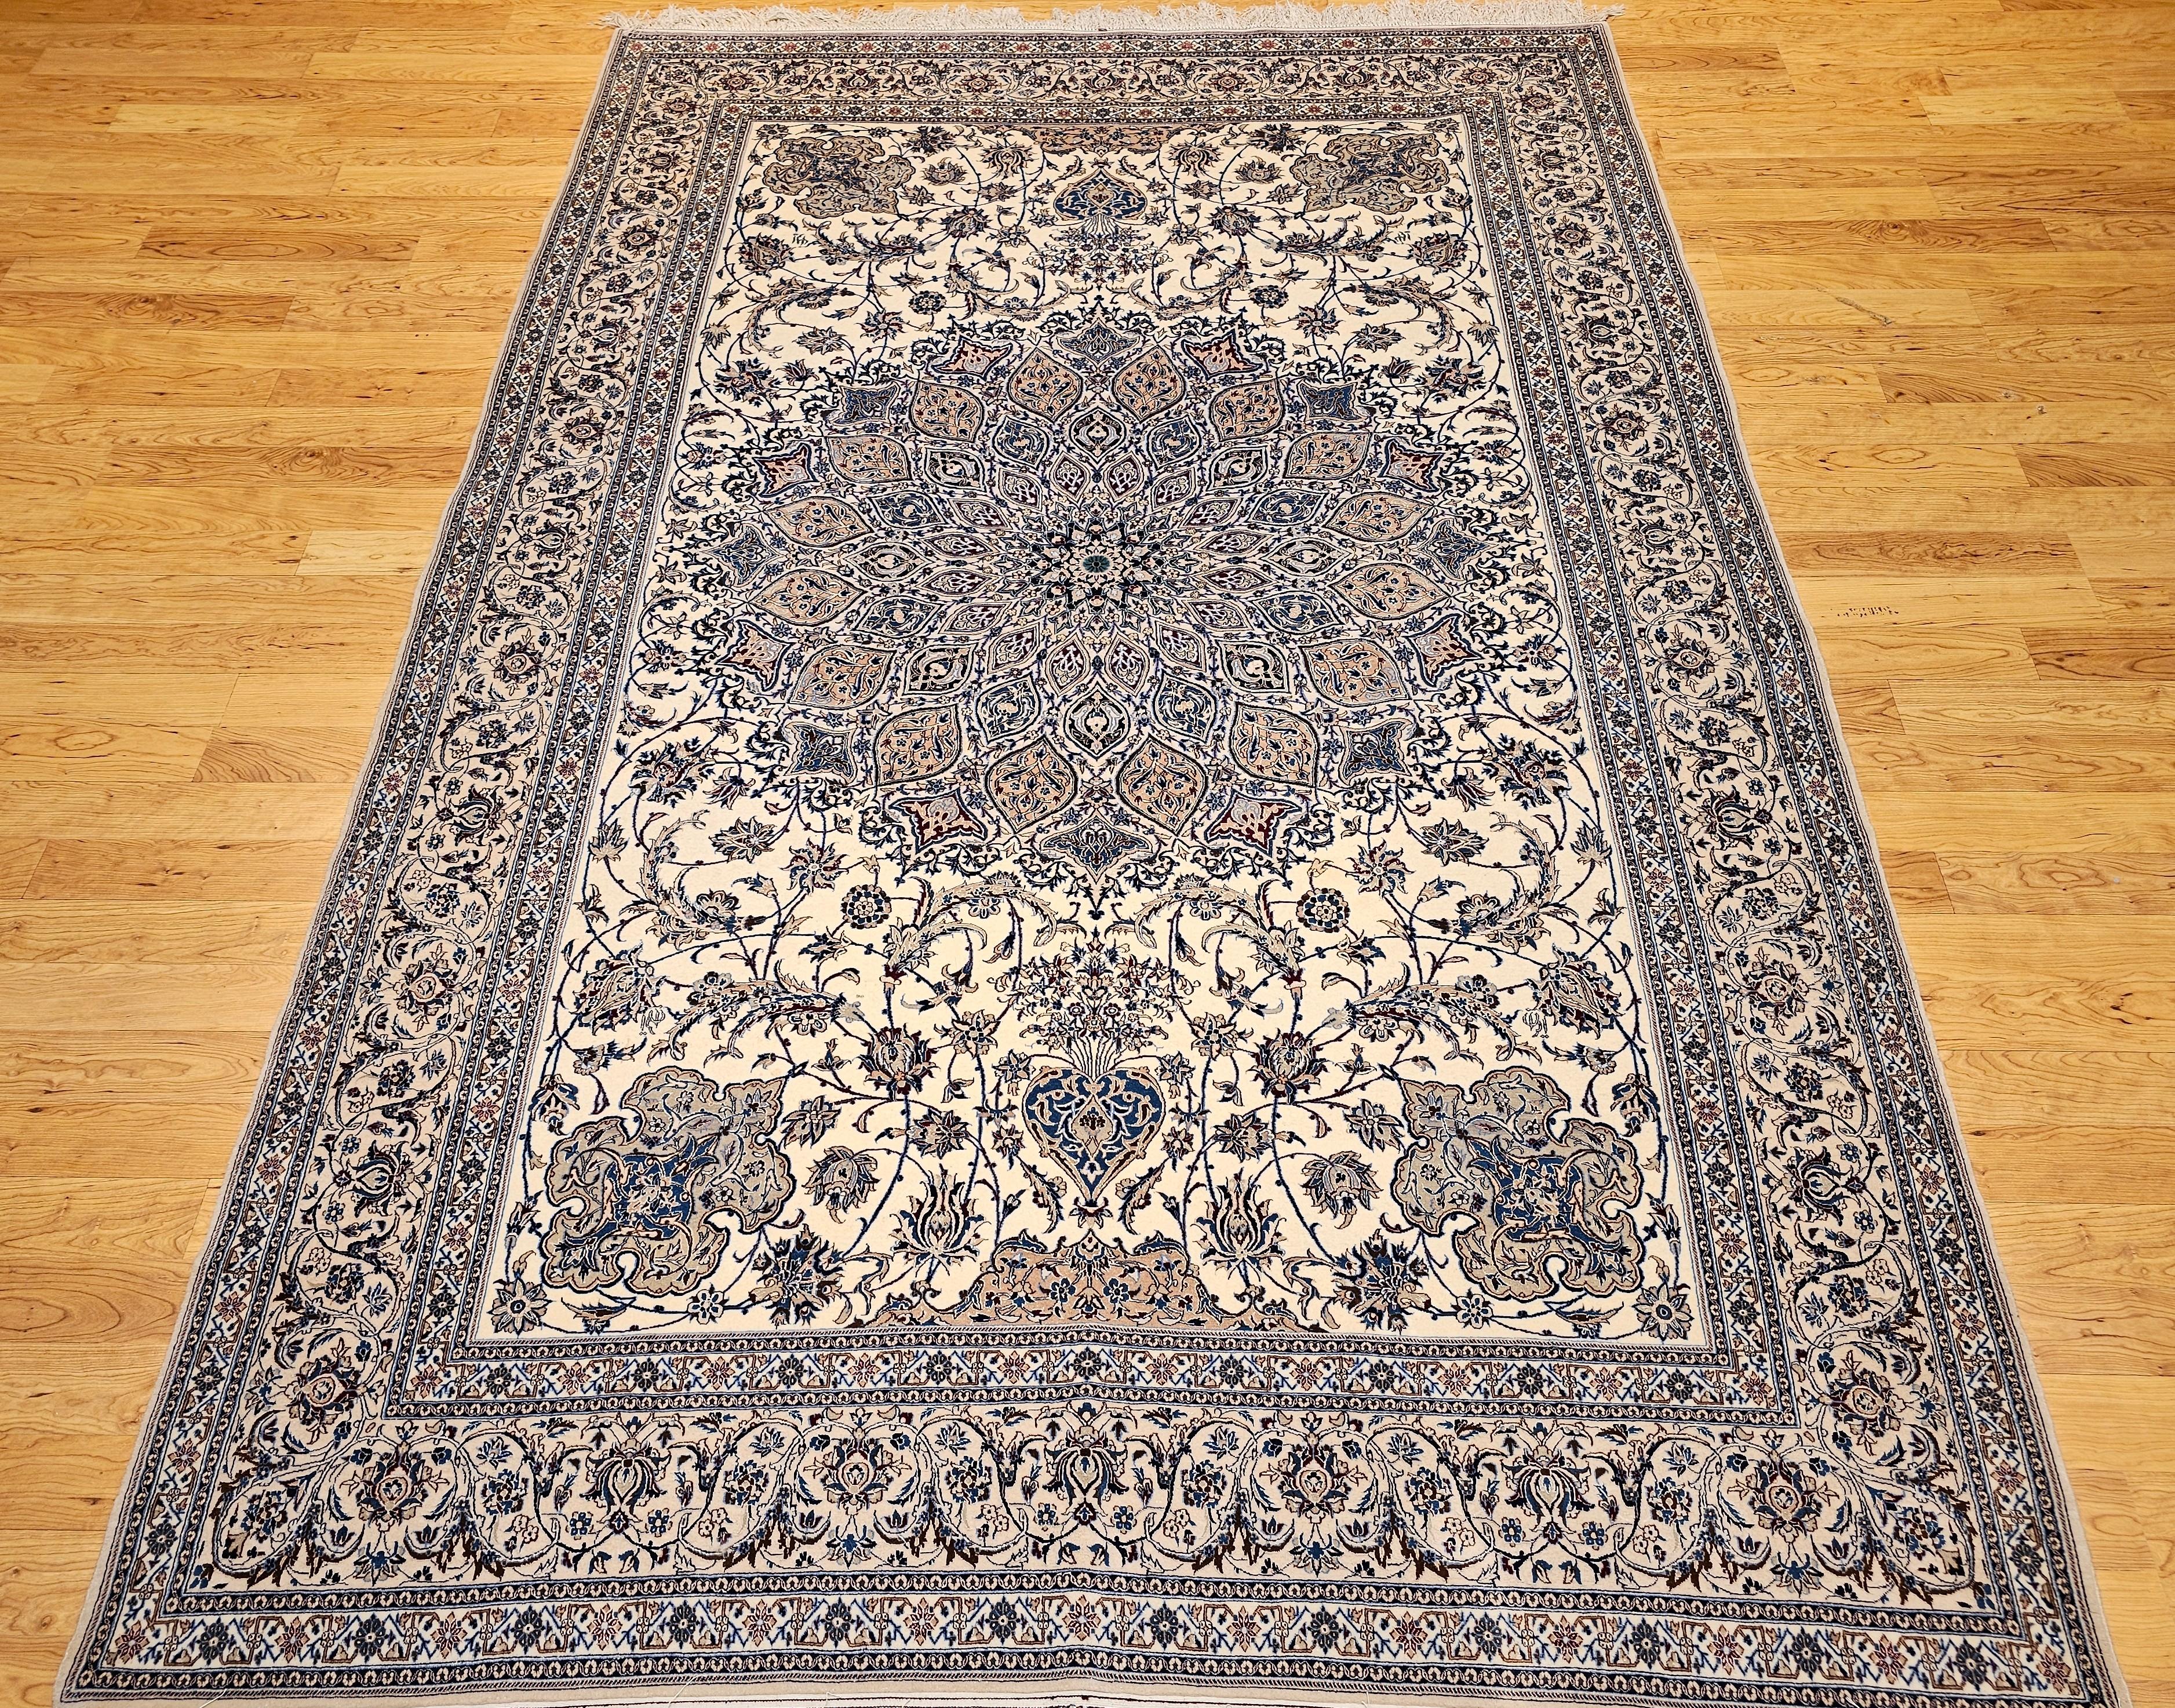 Extra fine weave hand-knotted room size-rug Persian Nain from the 4th quarter of the 1900s.  The Nain is in a floral medallion pattern with an ivory background, with a pale tan border and design accent colors in French blue, pale brown, and ivory